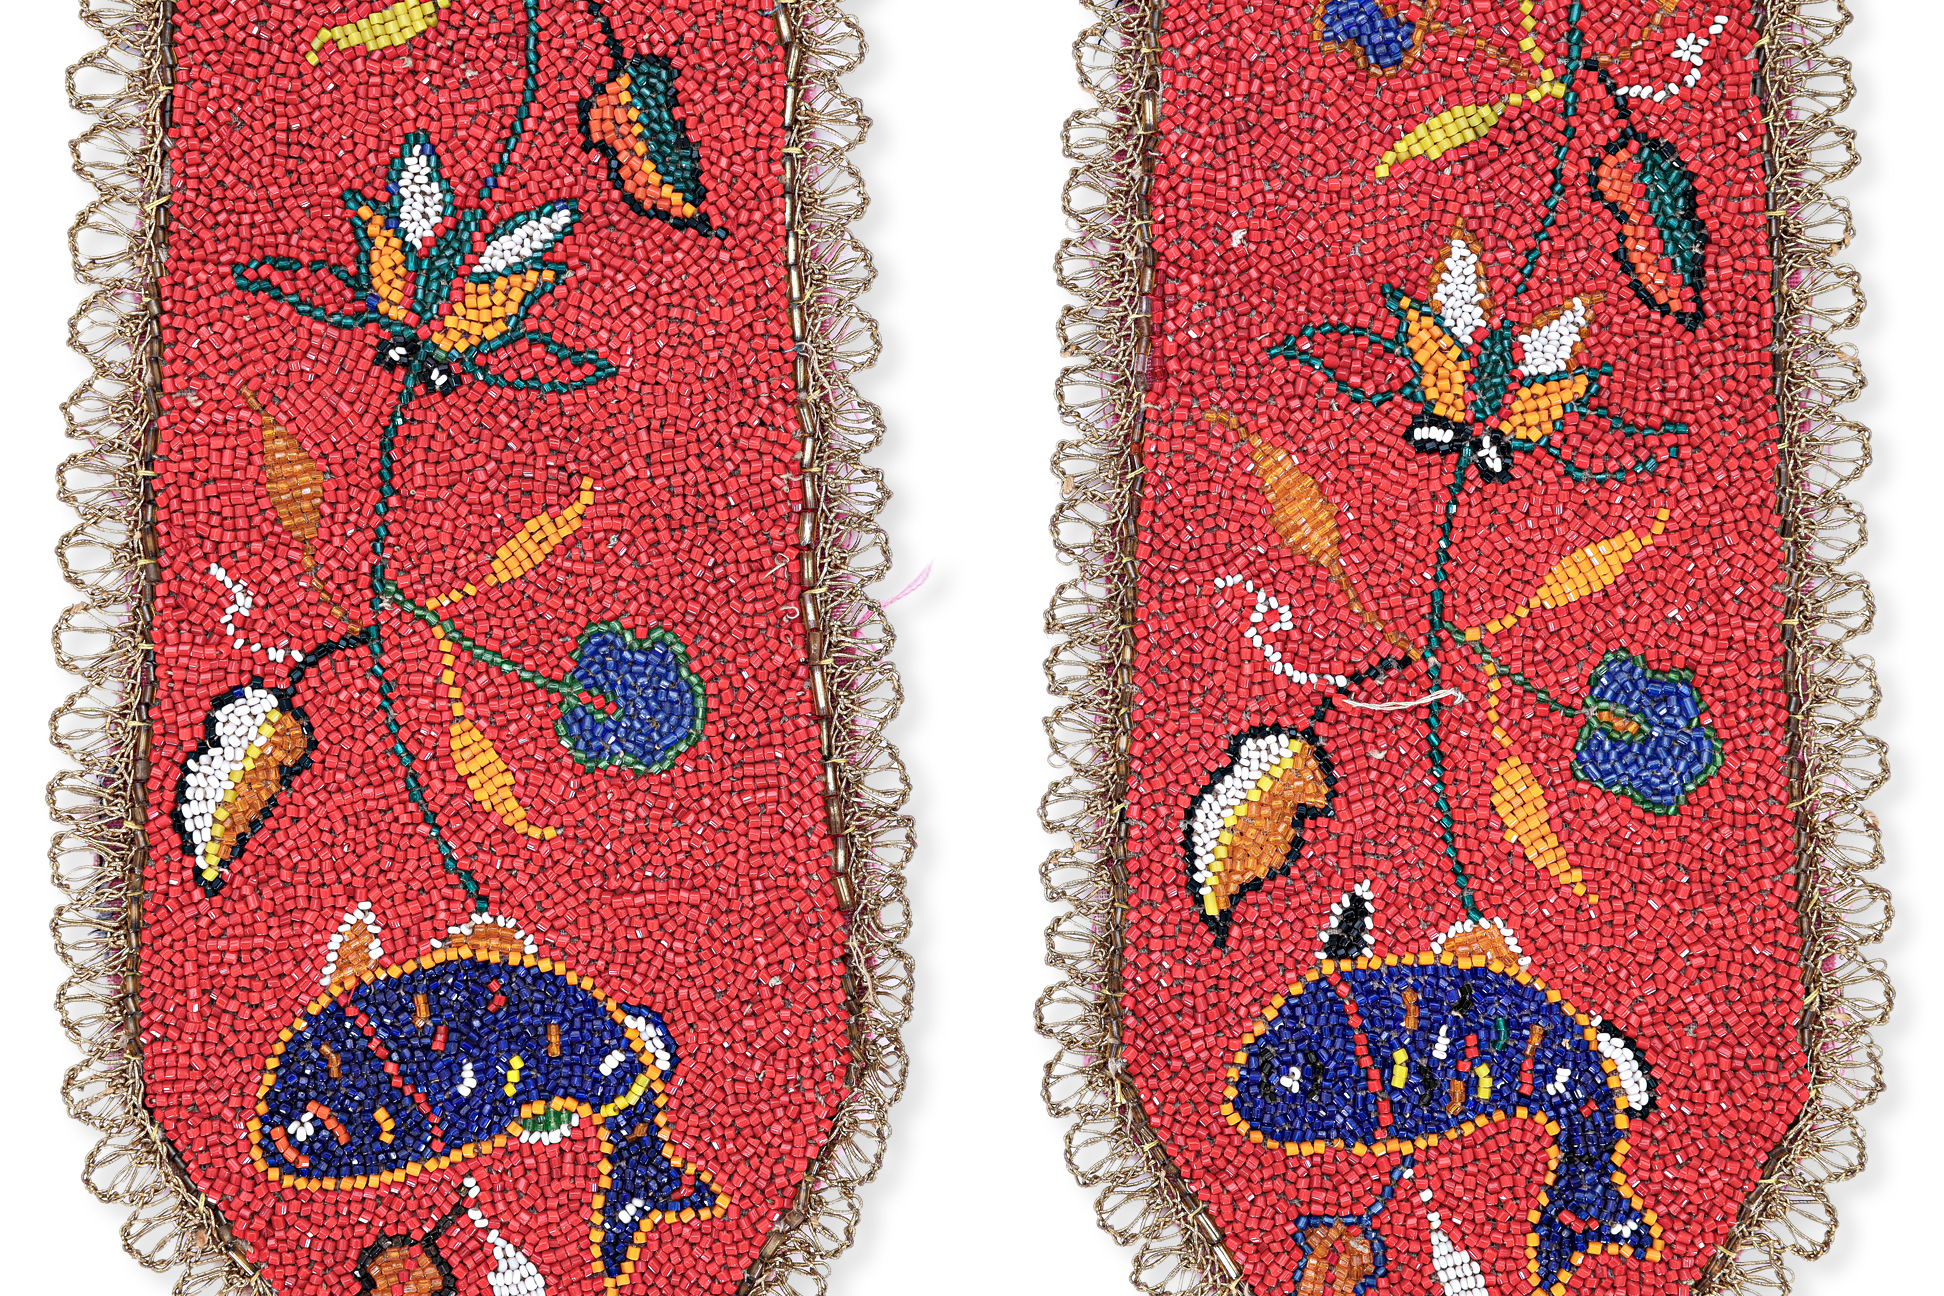 TWO BEADED AND EMBROIDERED HANGING COVERS - Image 2 of 2